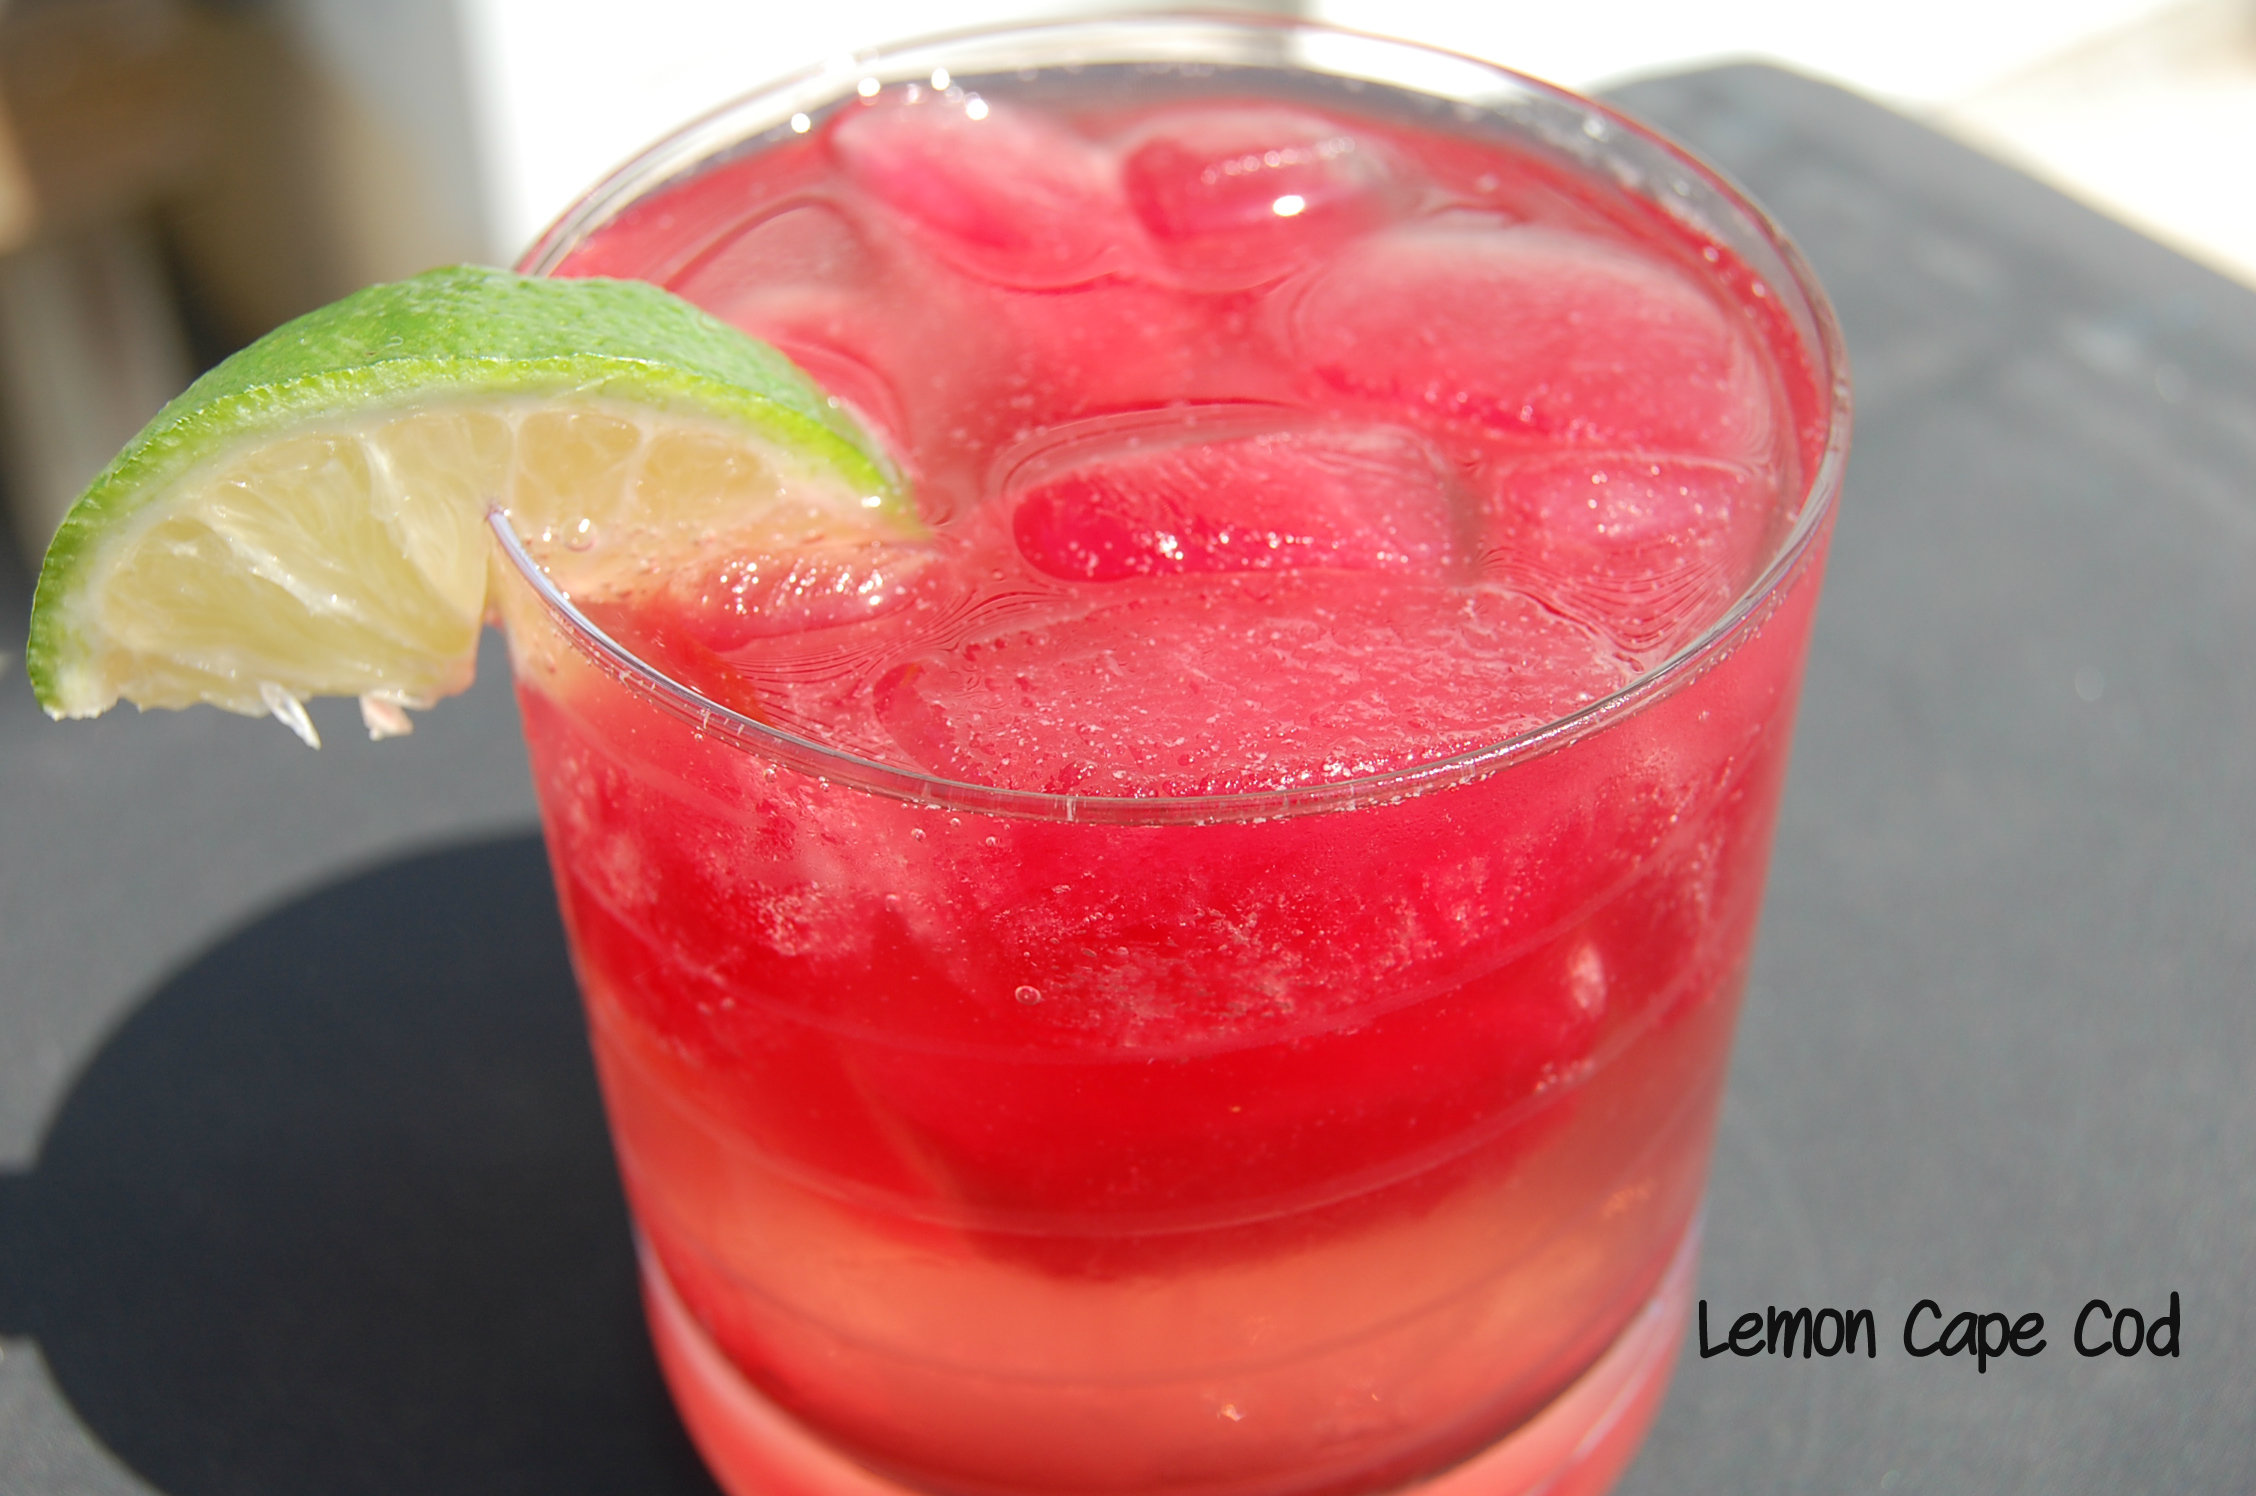 With vibrant flavors like lemon and cranberry the Lemon Cape Cod Cocktail is sure to be delicious! Great for summertime sipping!